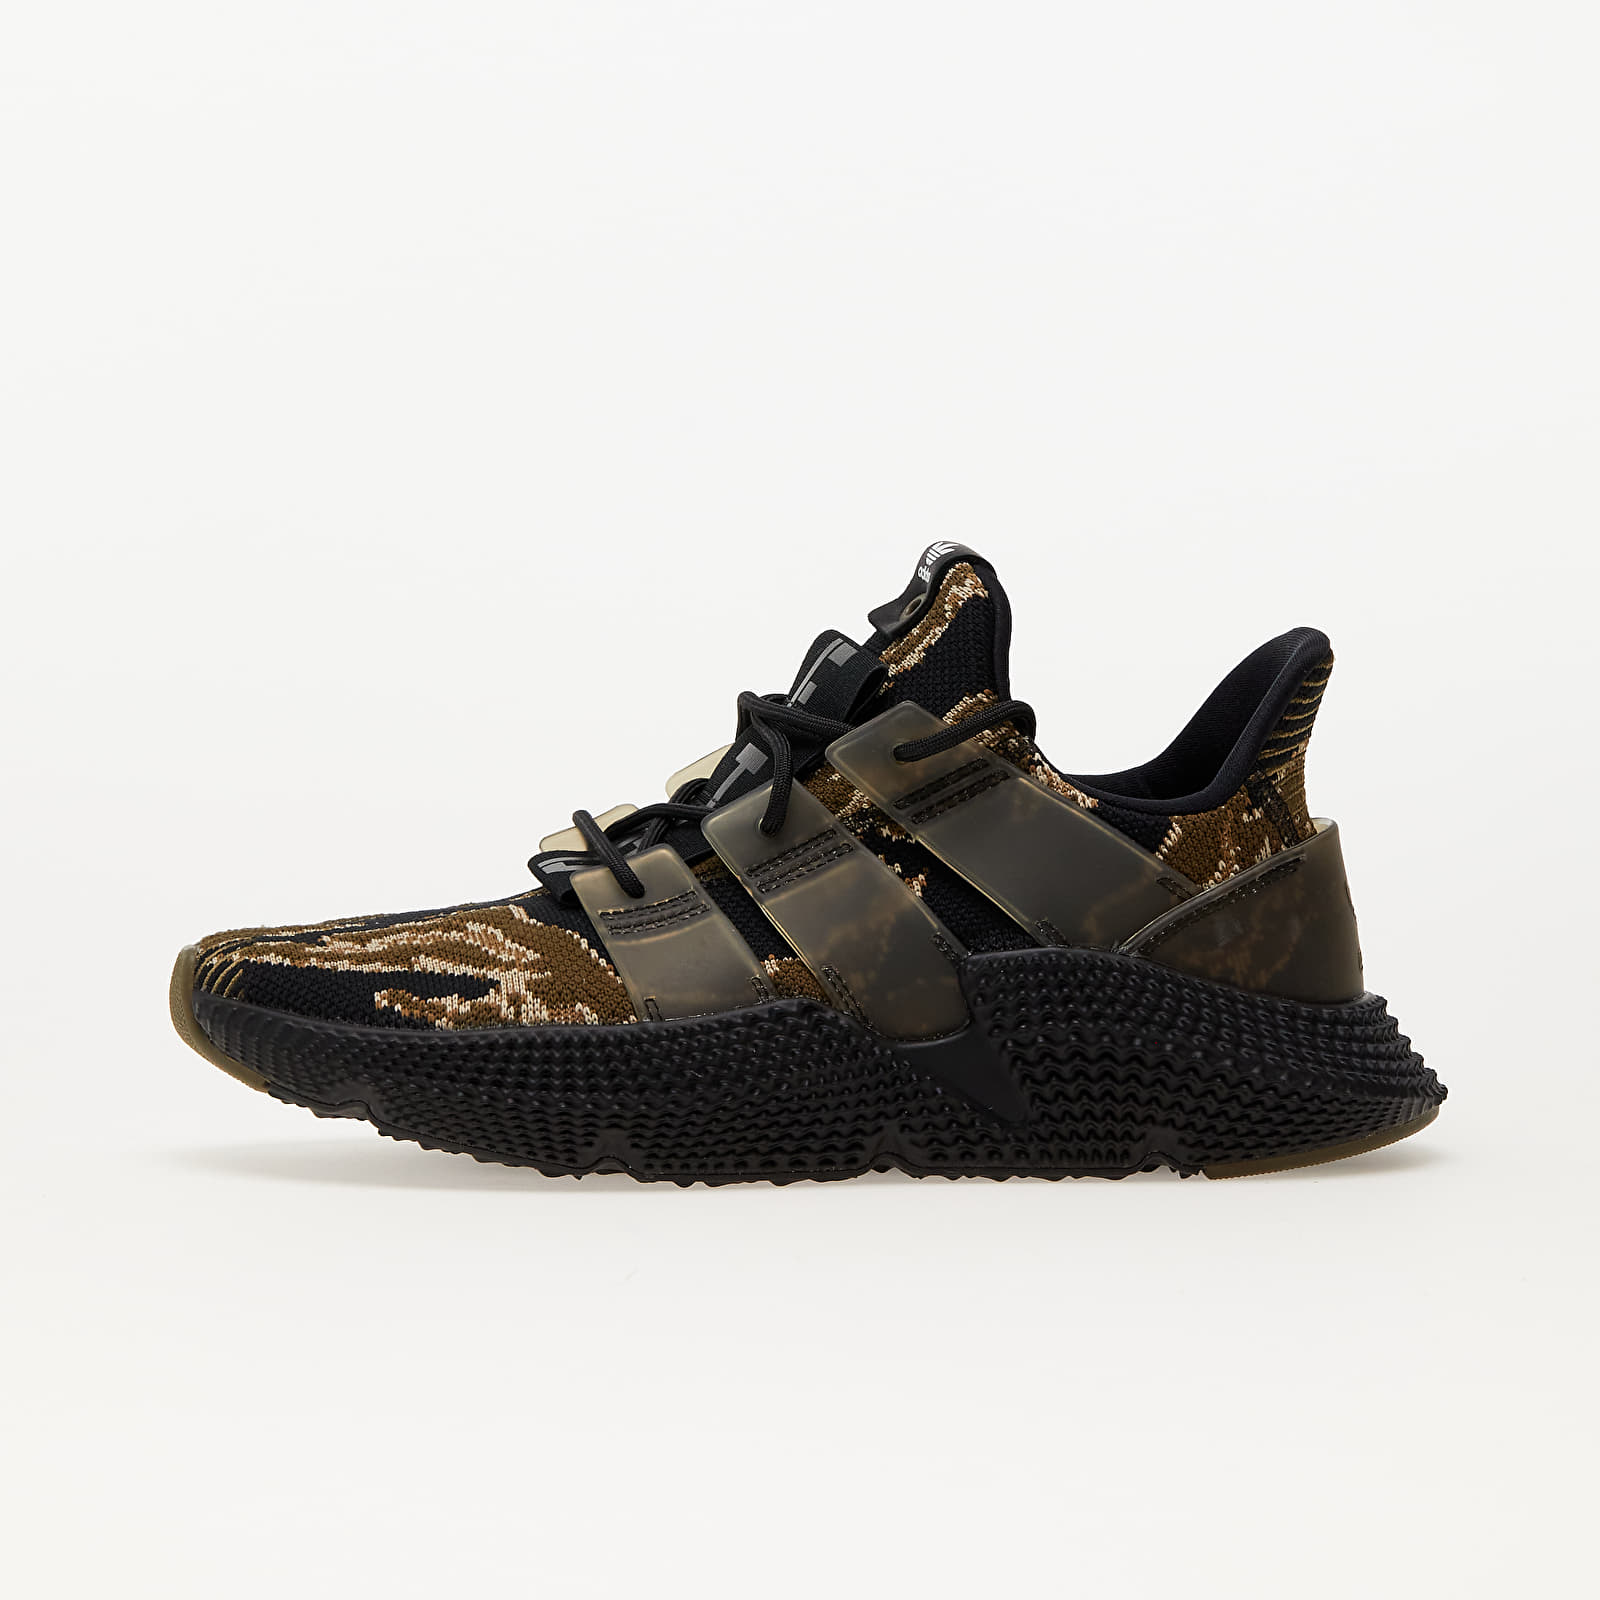 Pánske tenisky a topánky adidas Consortium x Undefeated Prophere Core Black/ Trace Olive/ Raw Gold